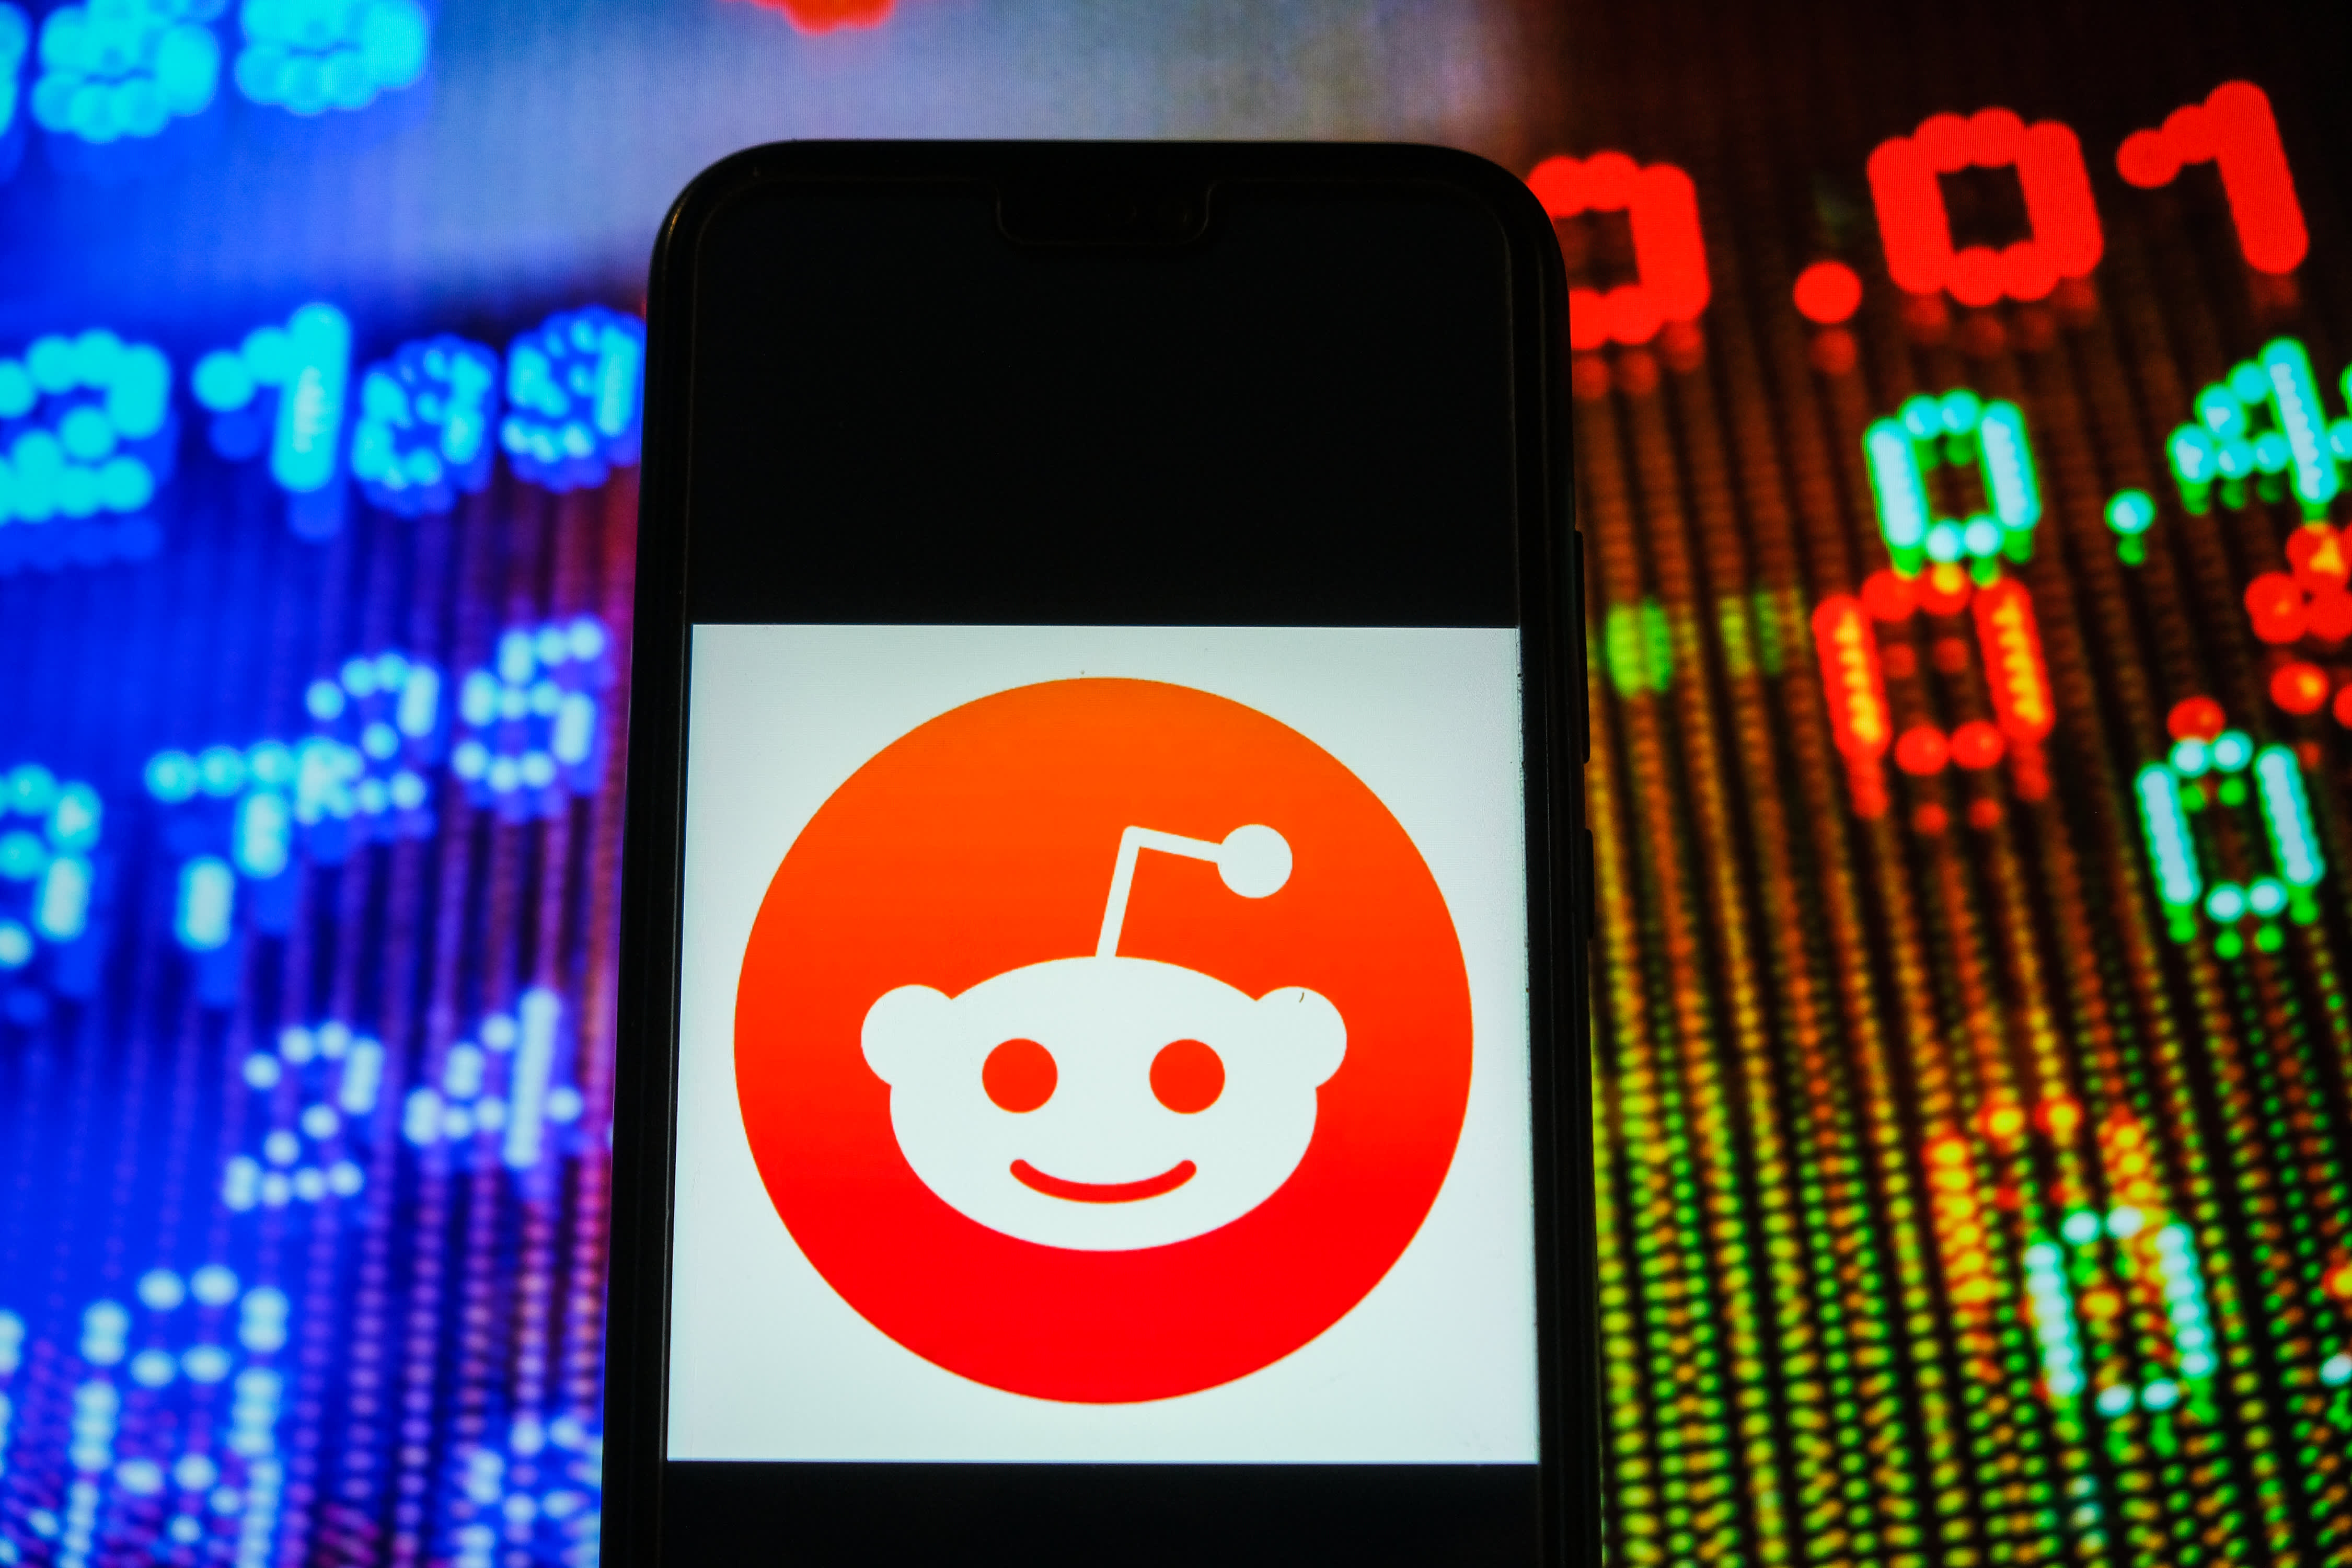 Wallstreetbets And Gamestop Reddit Investing Frenzy Spreads Overseas